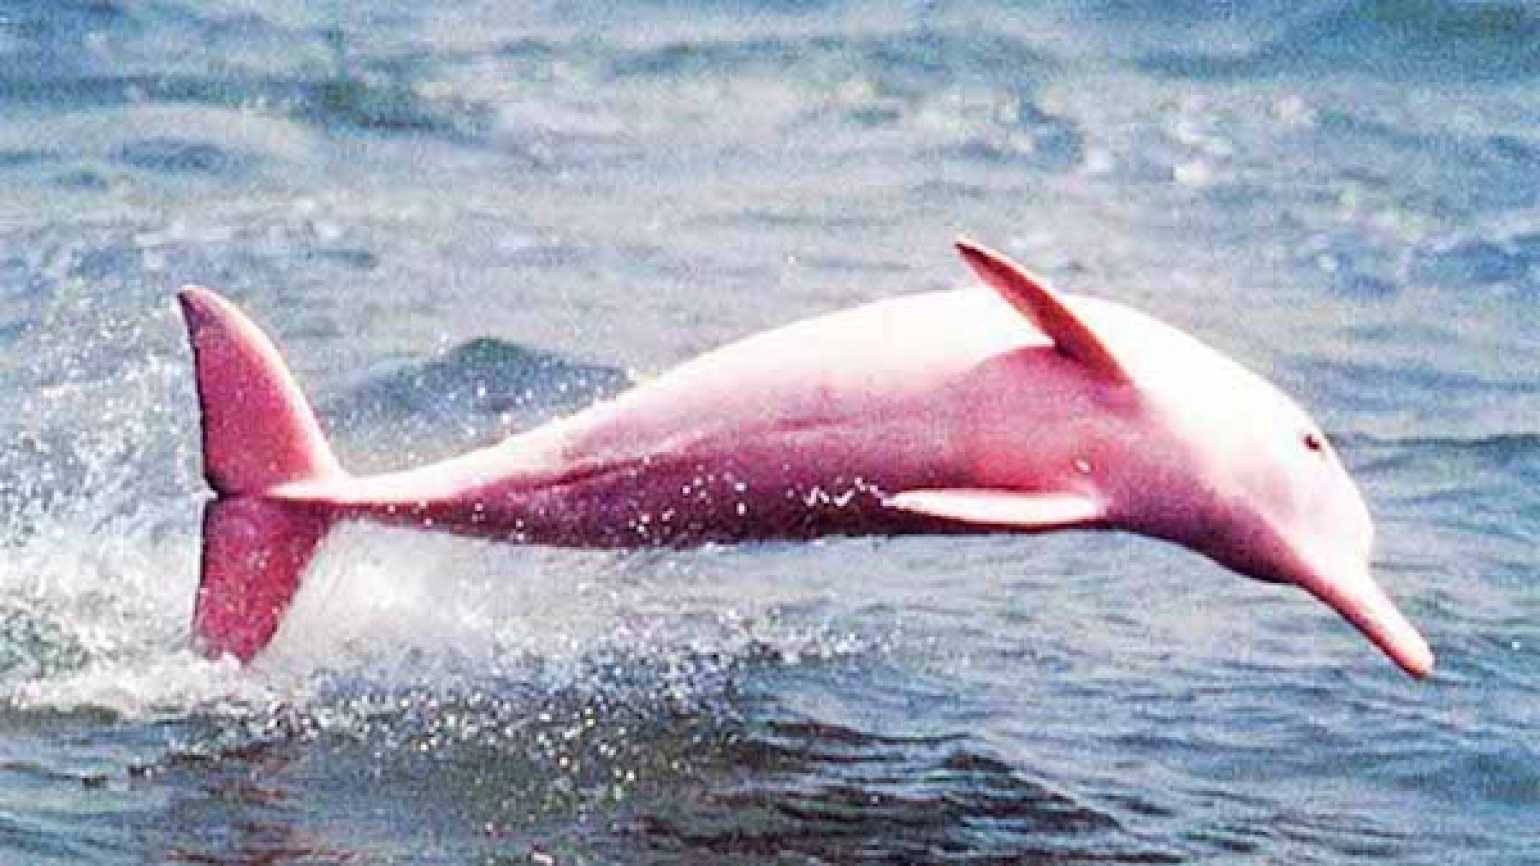 Sarah Nelson Tonight S Amazing Animal Is The Amazon River Dolphin Adults Acquire A Pink Color More Prominent In Males Giving It Its Nickname Pink River Dolphin Enormously Lucky To Have